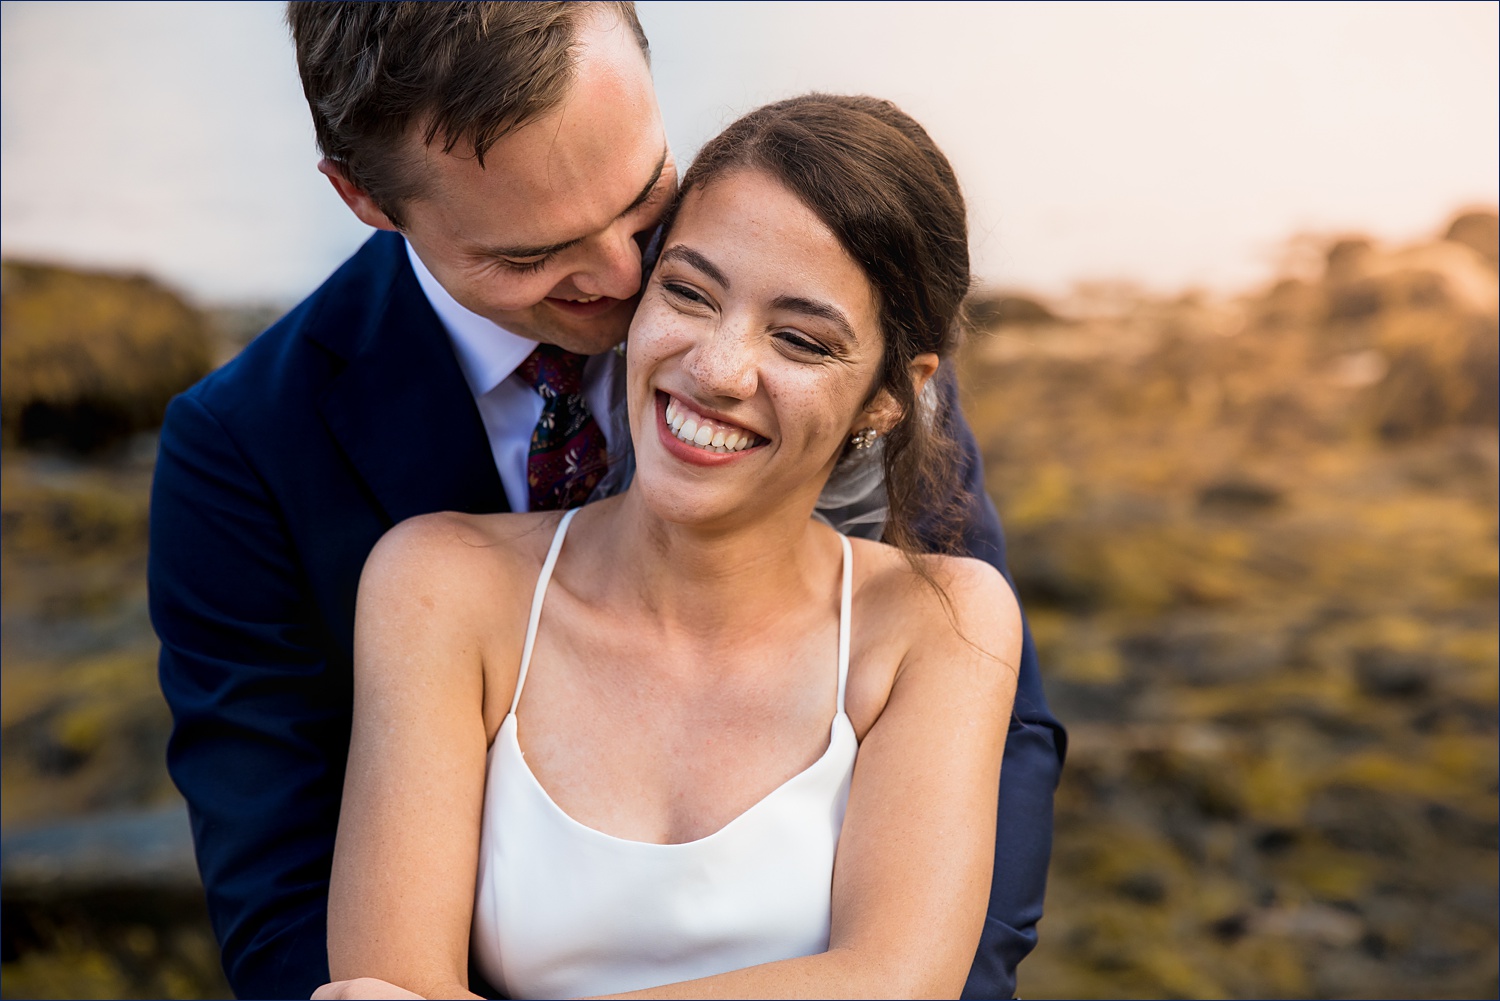 The couple laughs and hold each other close on their Deer Isle Maine wedding day